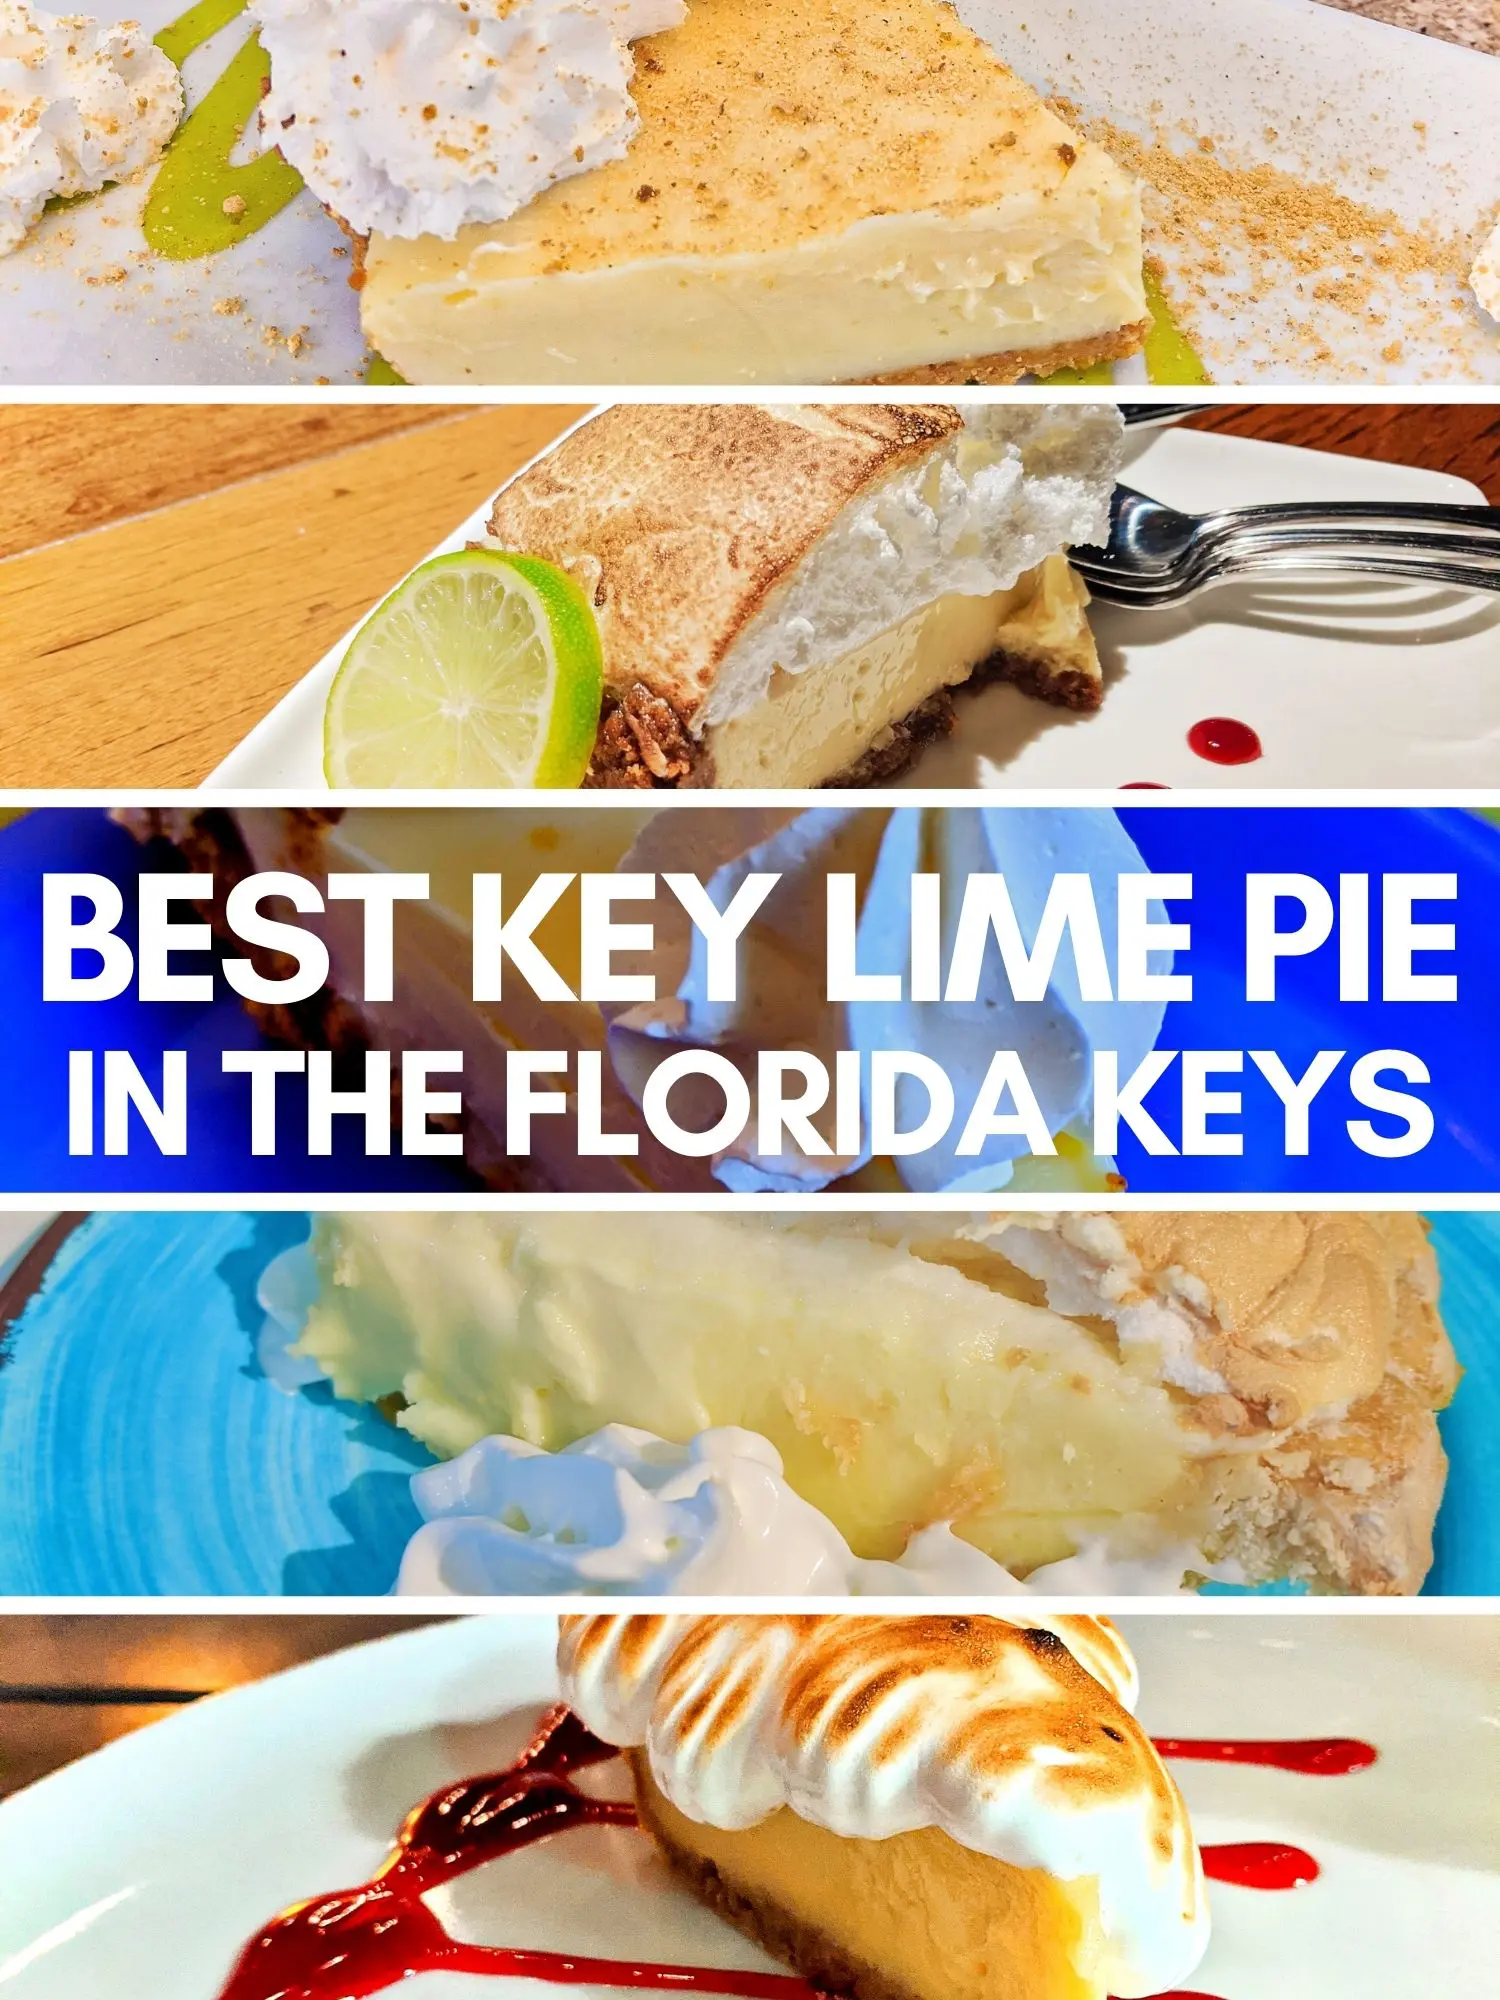 The Florida Keys have countless varieties of key lime pie slices and cocktails. This is the guide to the best key lime pie in the Florida Keys, from Key Largo to Key West, and a key lime pie recipe.